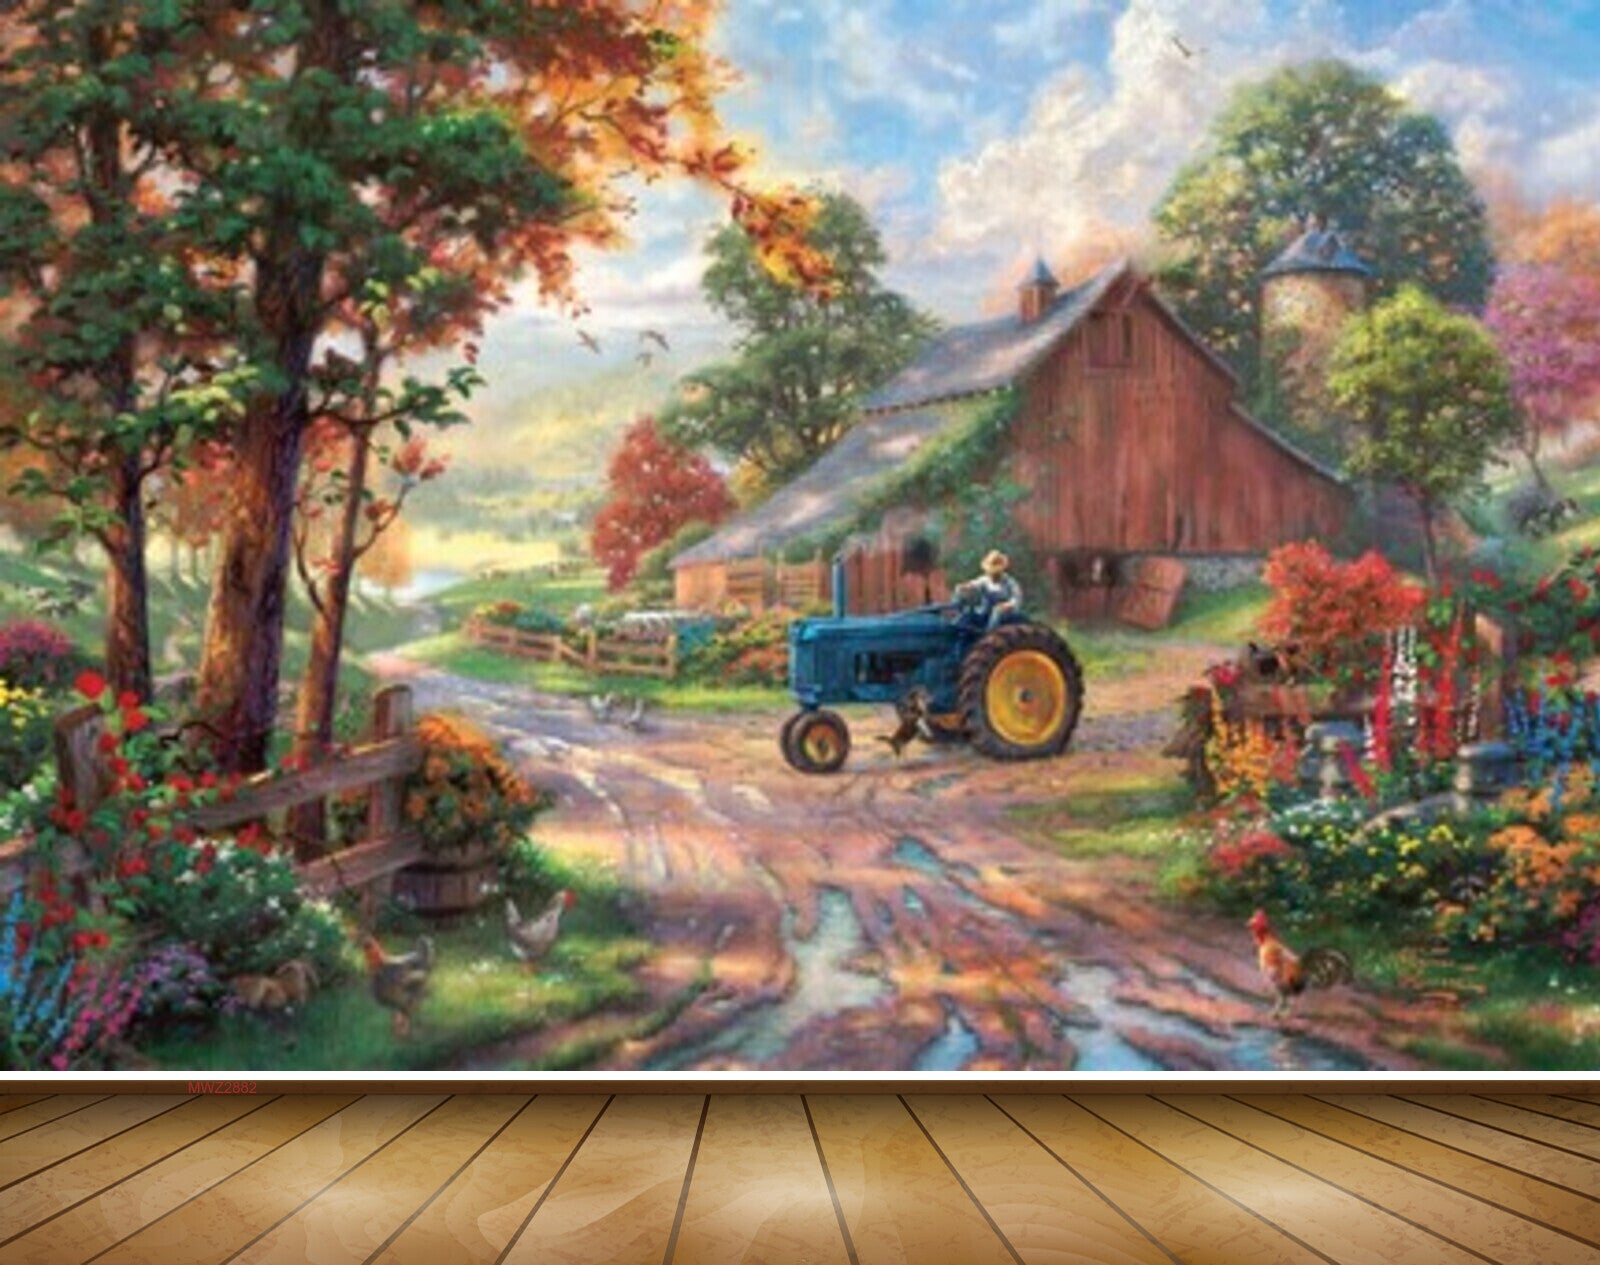 Avikalp MWZ2882 House Trees Flowers Tractor Man Hens Dog Grass Plants Off Road Painting HD Wallpaper